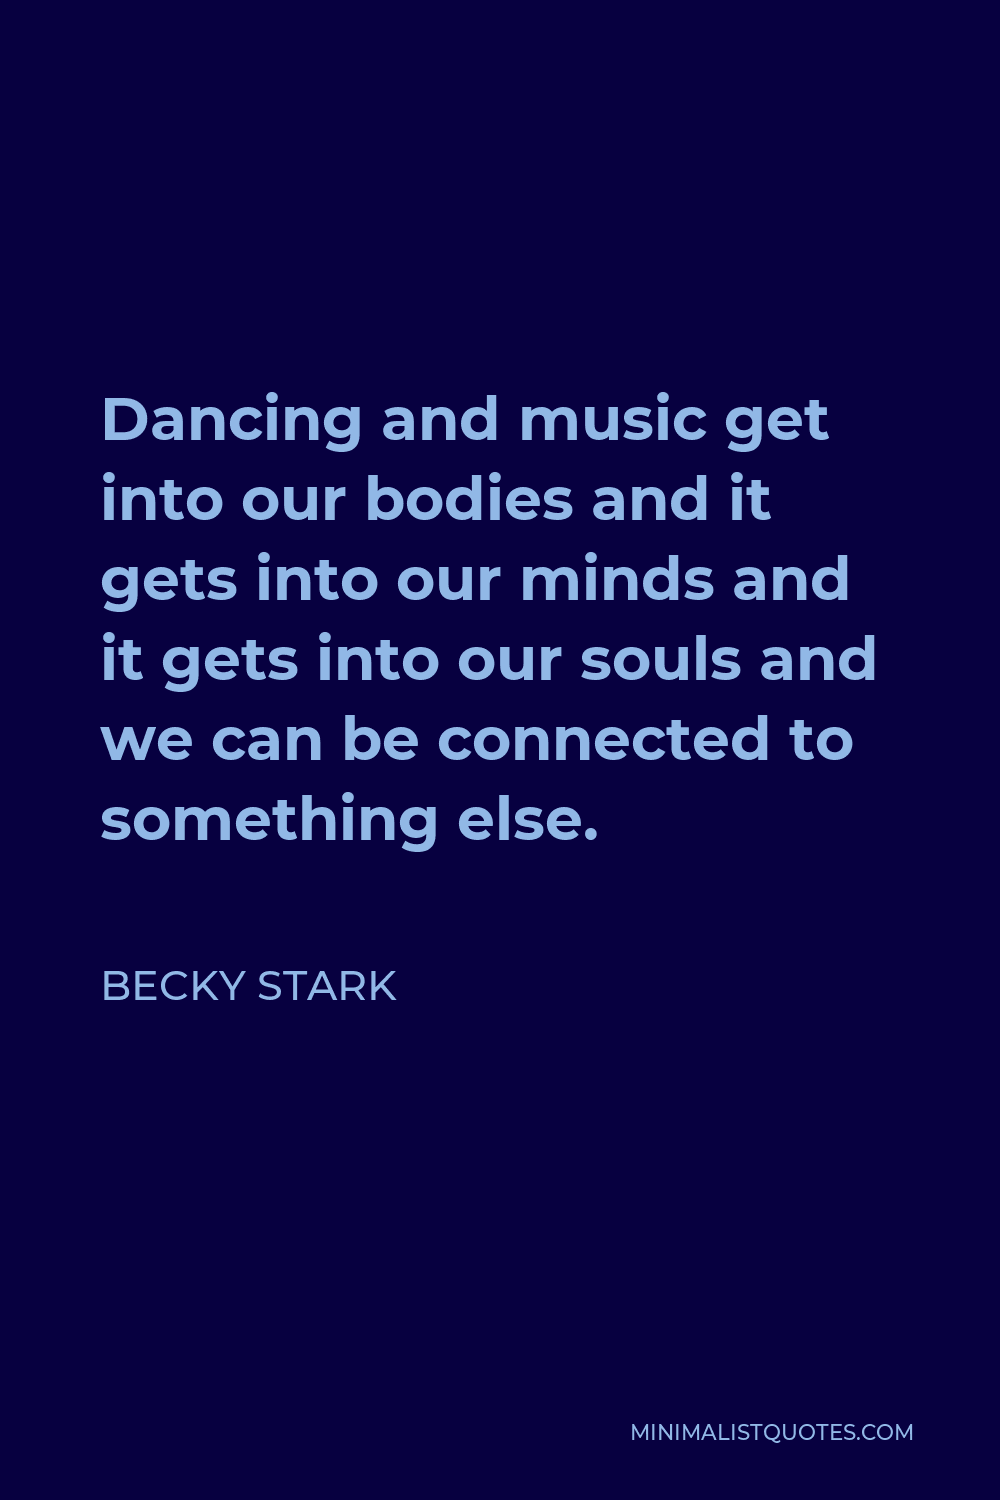 Becky Stark Quote - Dancing and music get into our bodies and it gets into our minds and it gets into our souls and we can be connected to something else.